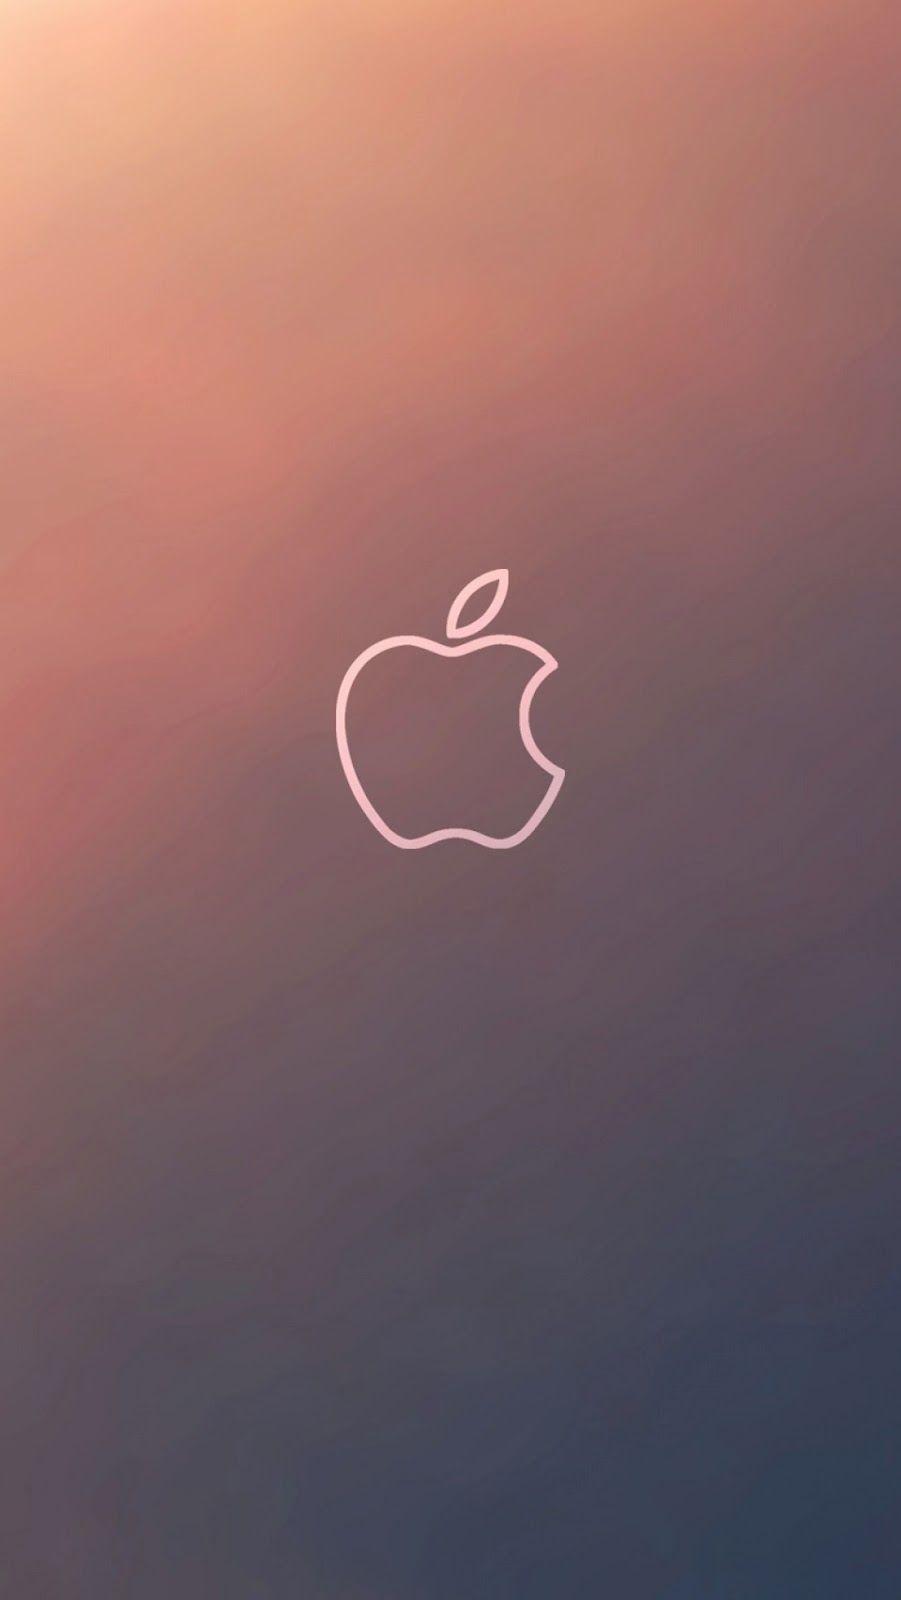 Image for Simple iPhone 6S Wallpaper HD. GuhPix Gallery